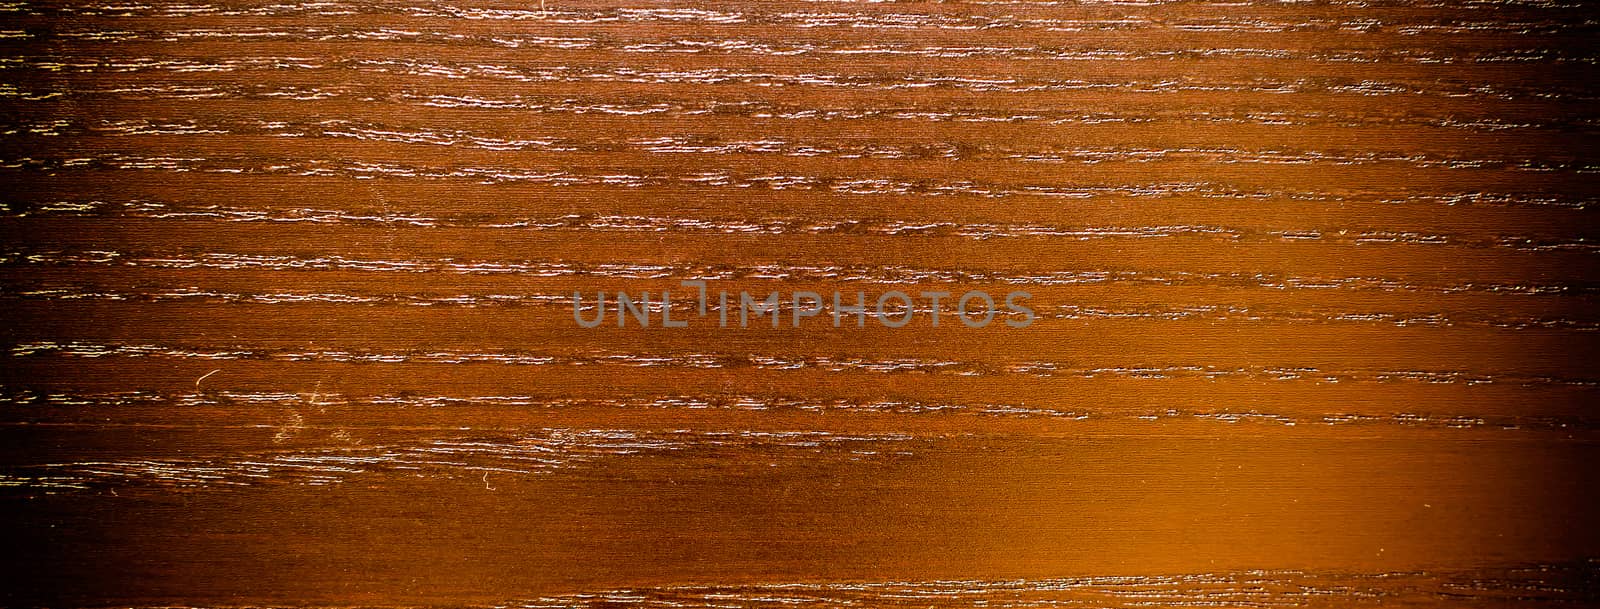 Wooden texture for background with vignette by marcorubino